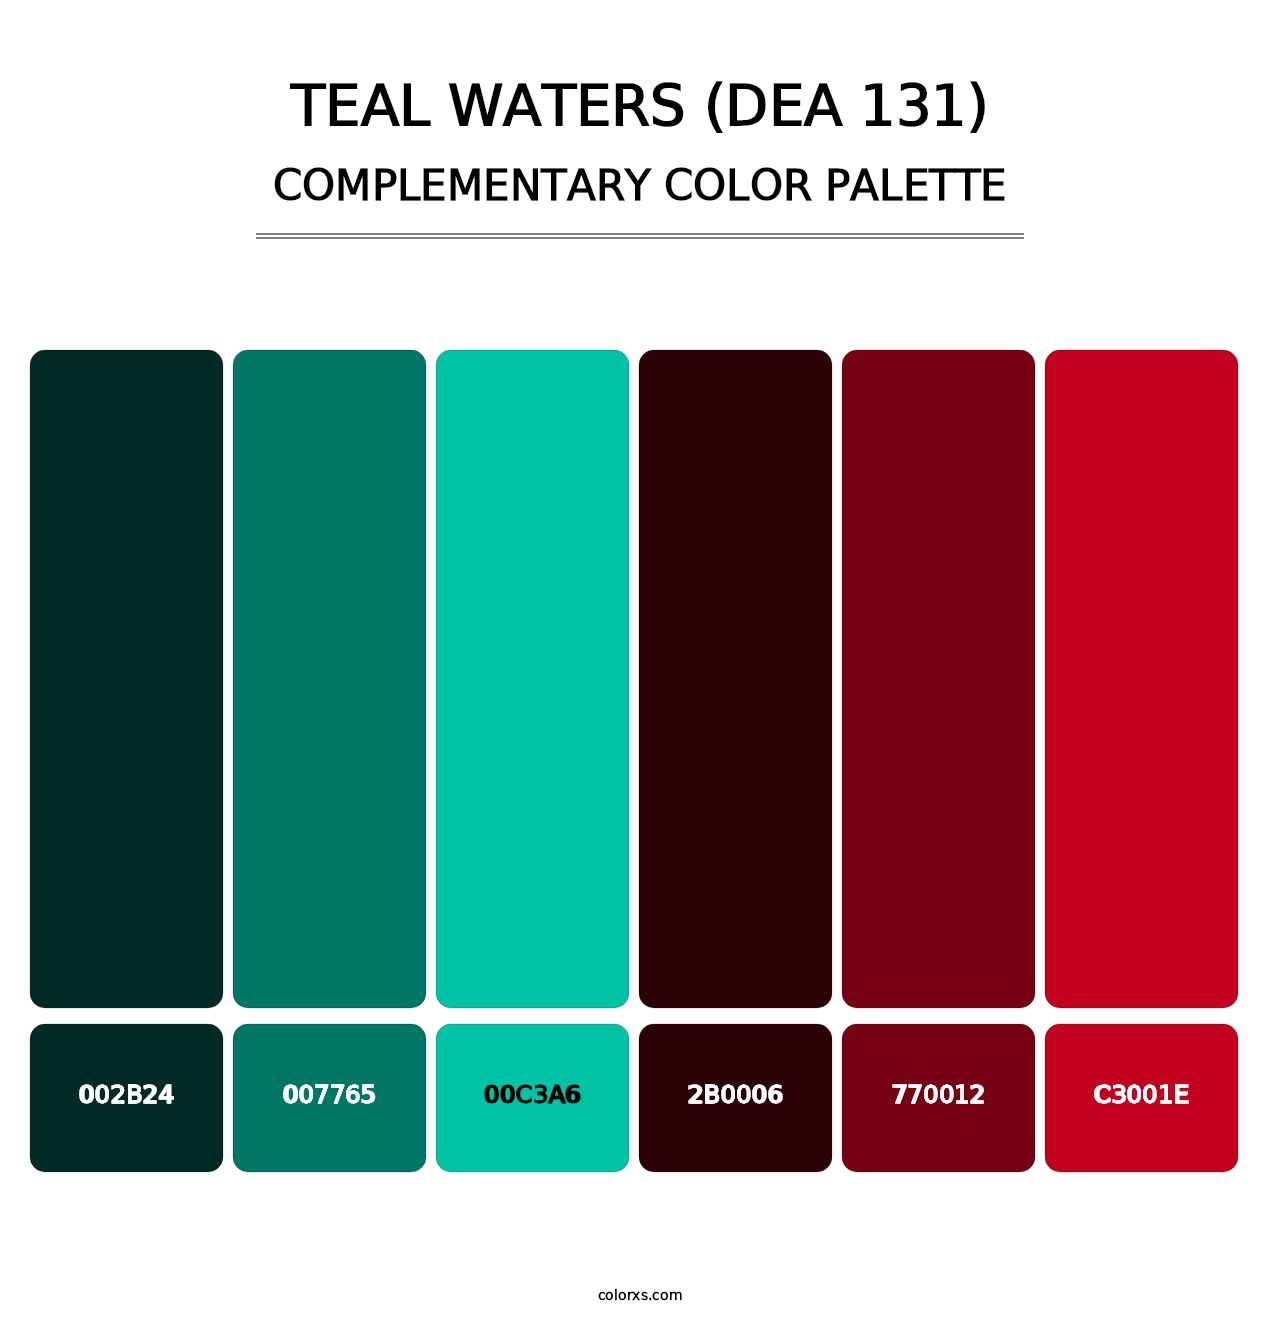 Teal Waters (DEA 131) - Complementary Color Palette